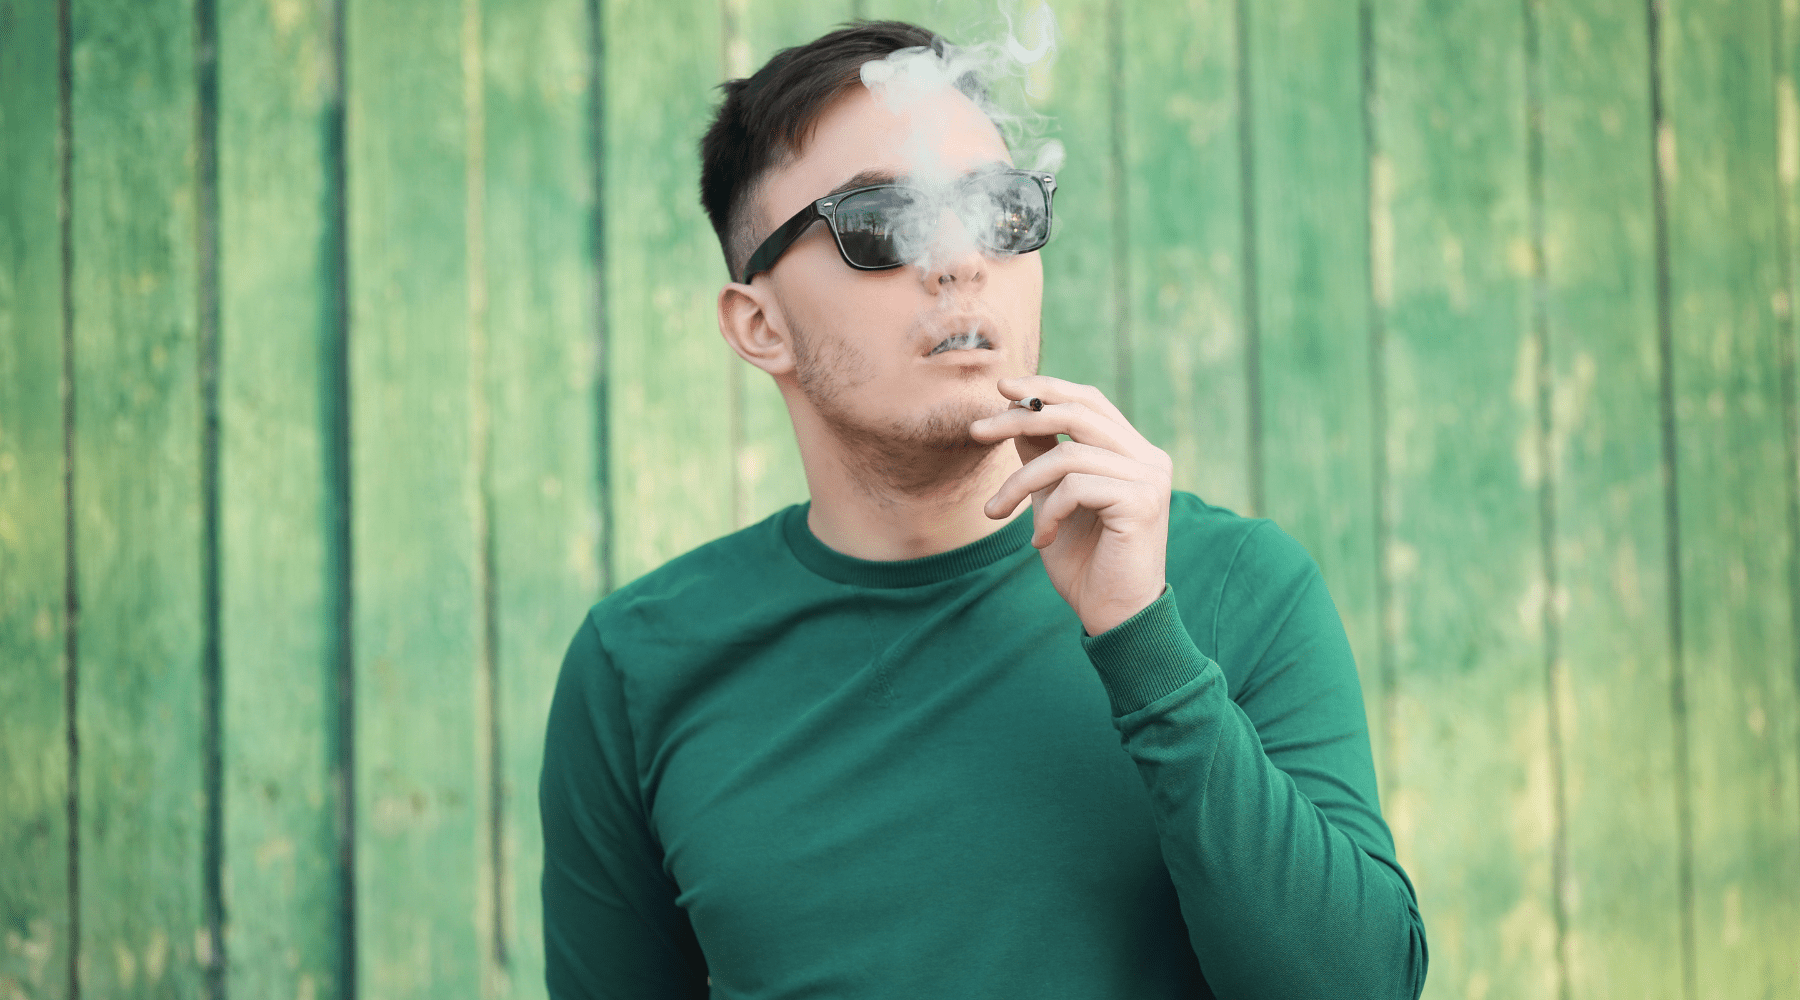 a photo of a man in a green sweater smoking a joint rich in delta-9 THC in front of a green fence